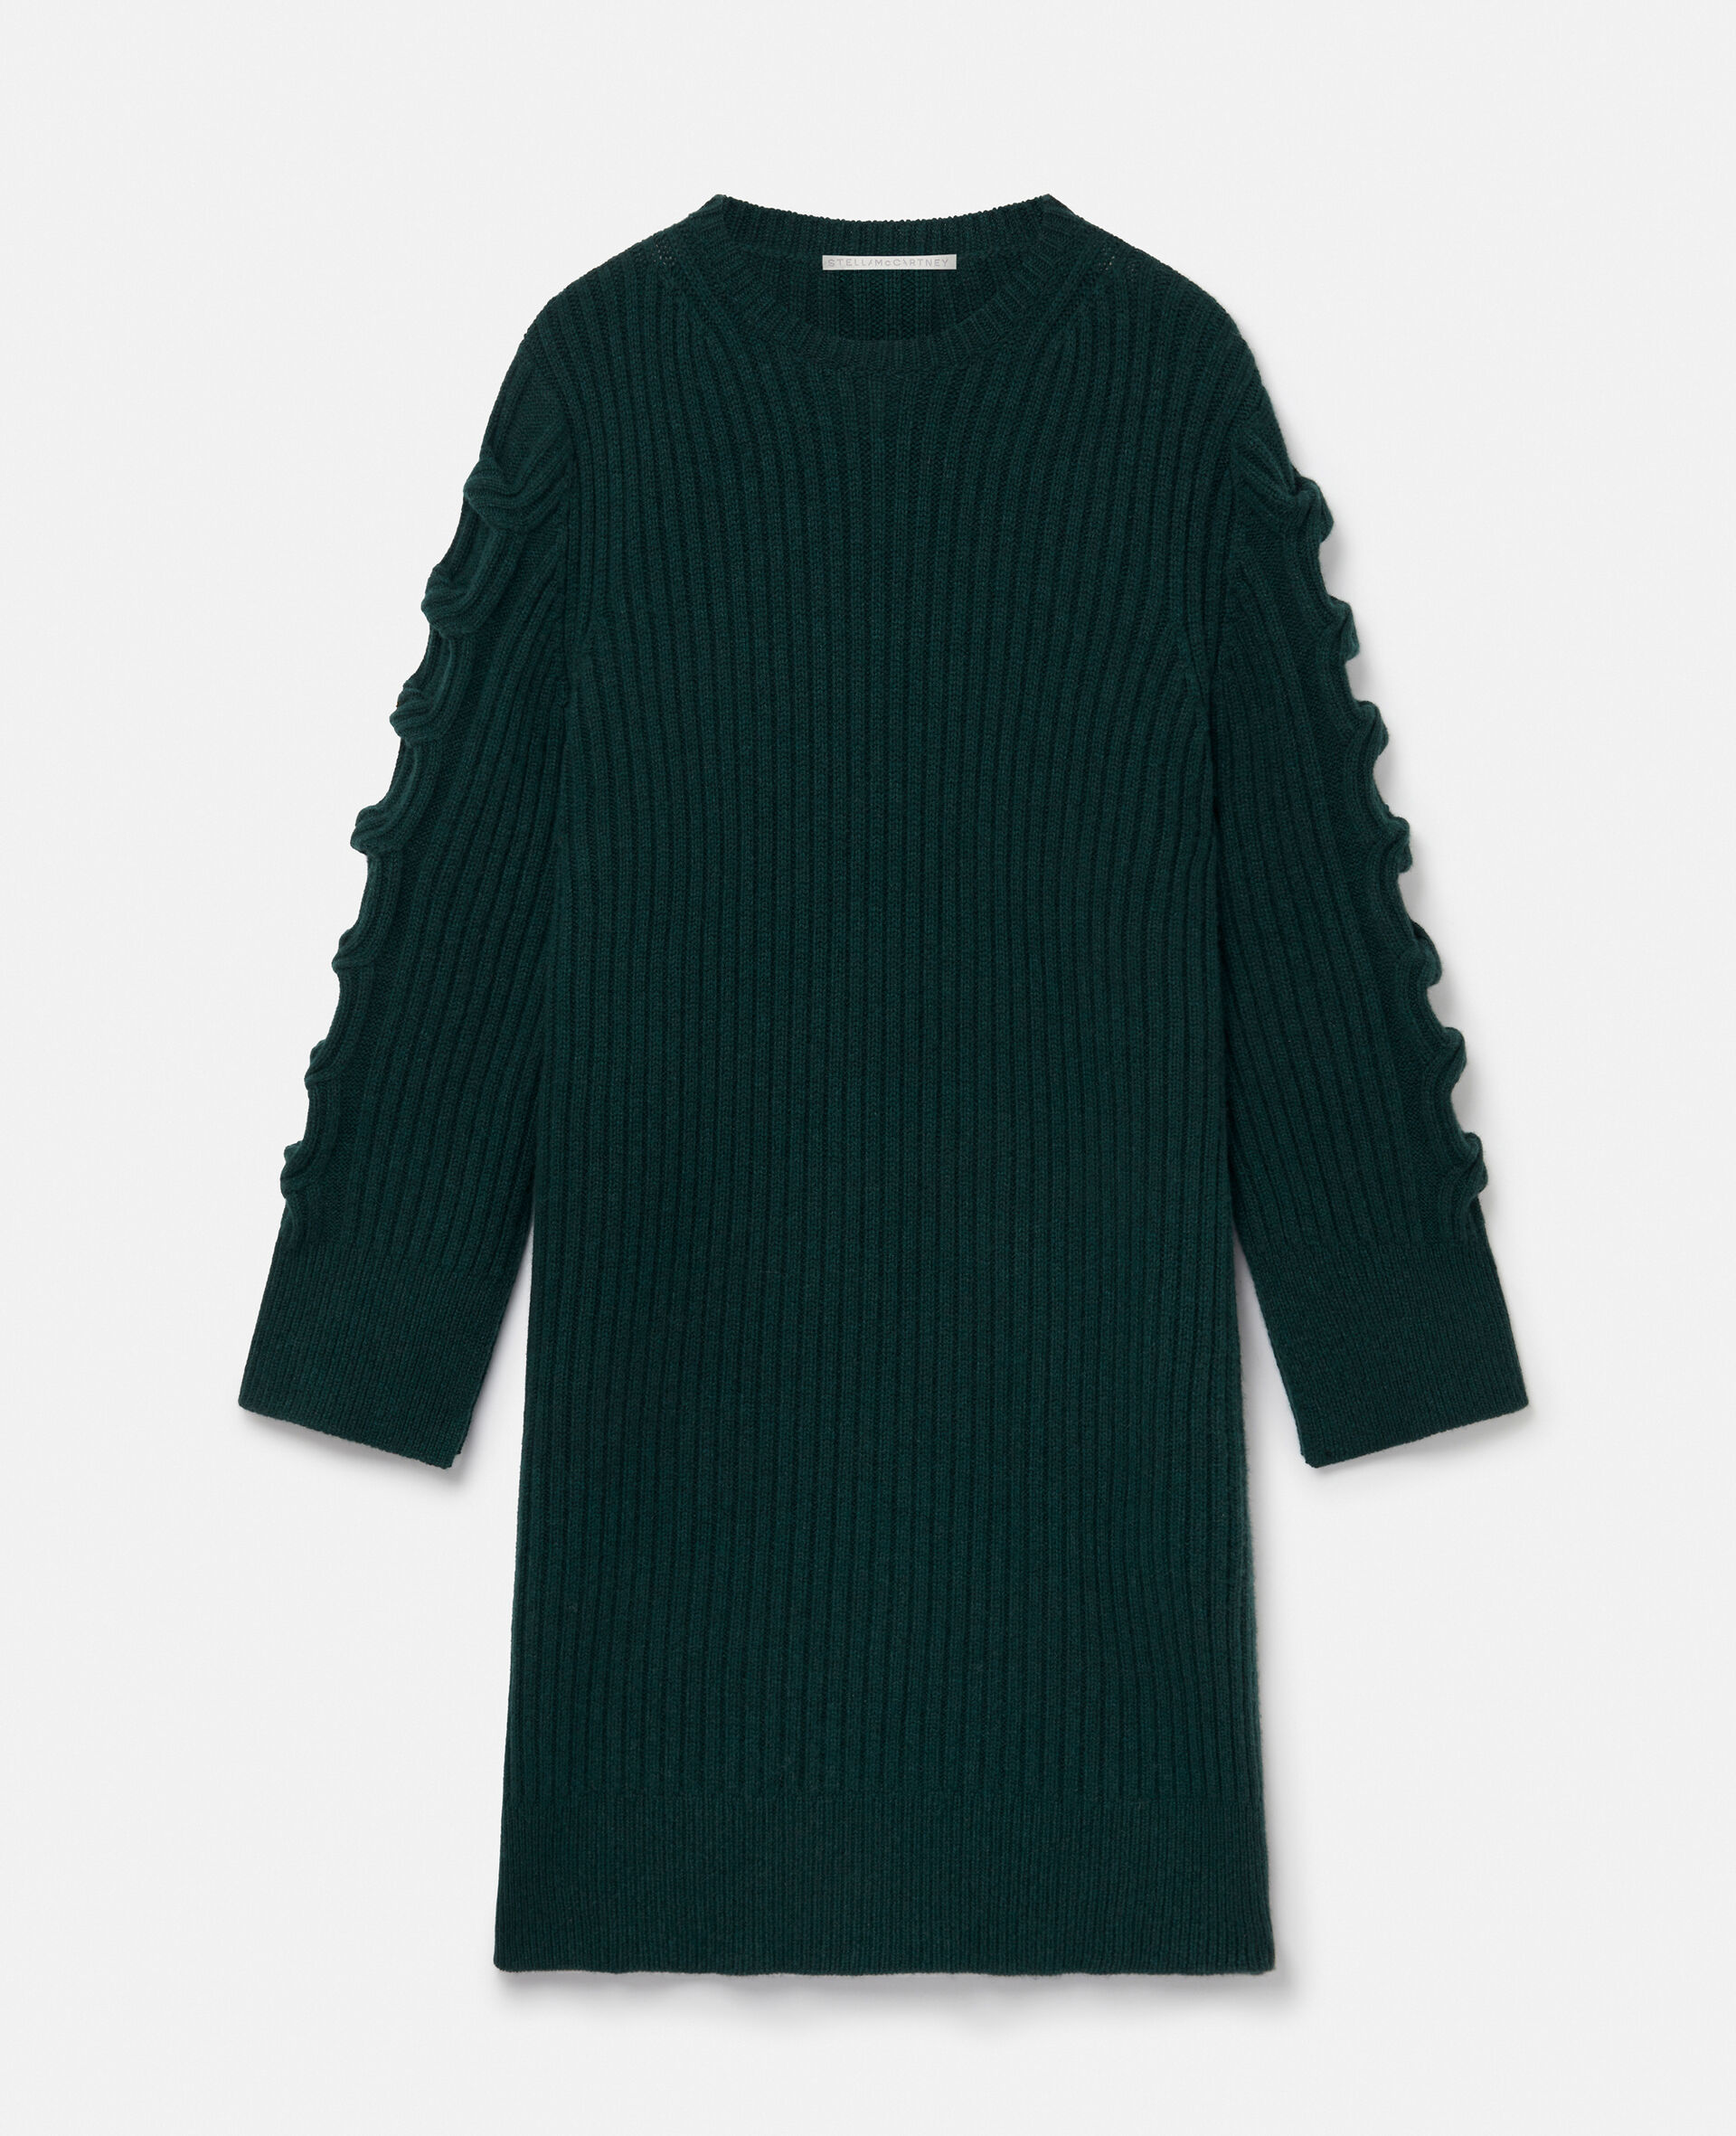 Regenerated Cashmere Chain Cable Knit Jumper Dress-Green-large image number 0